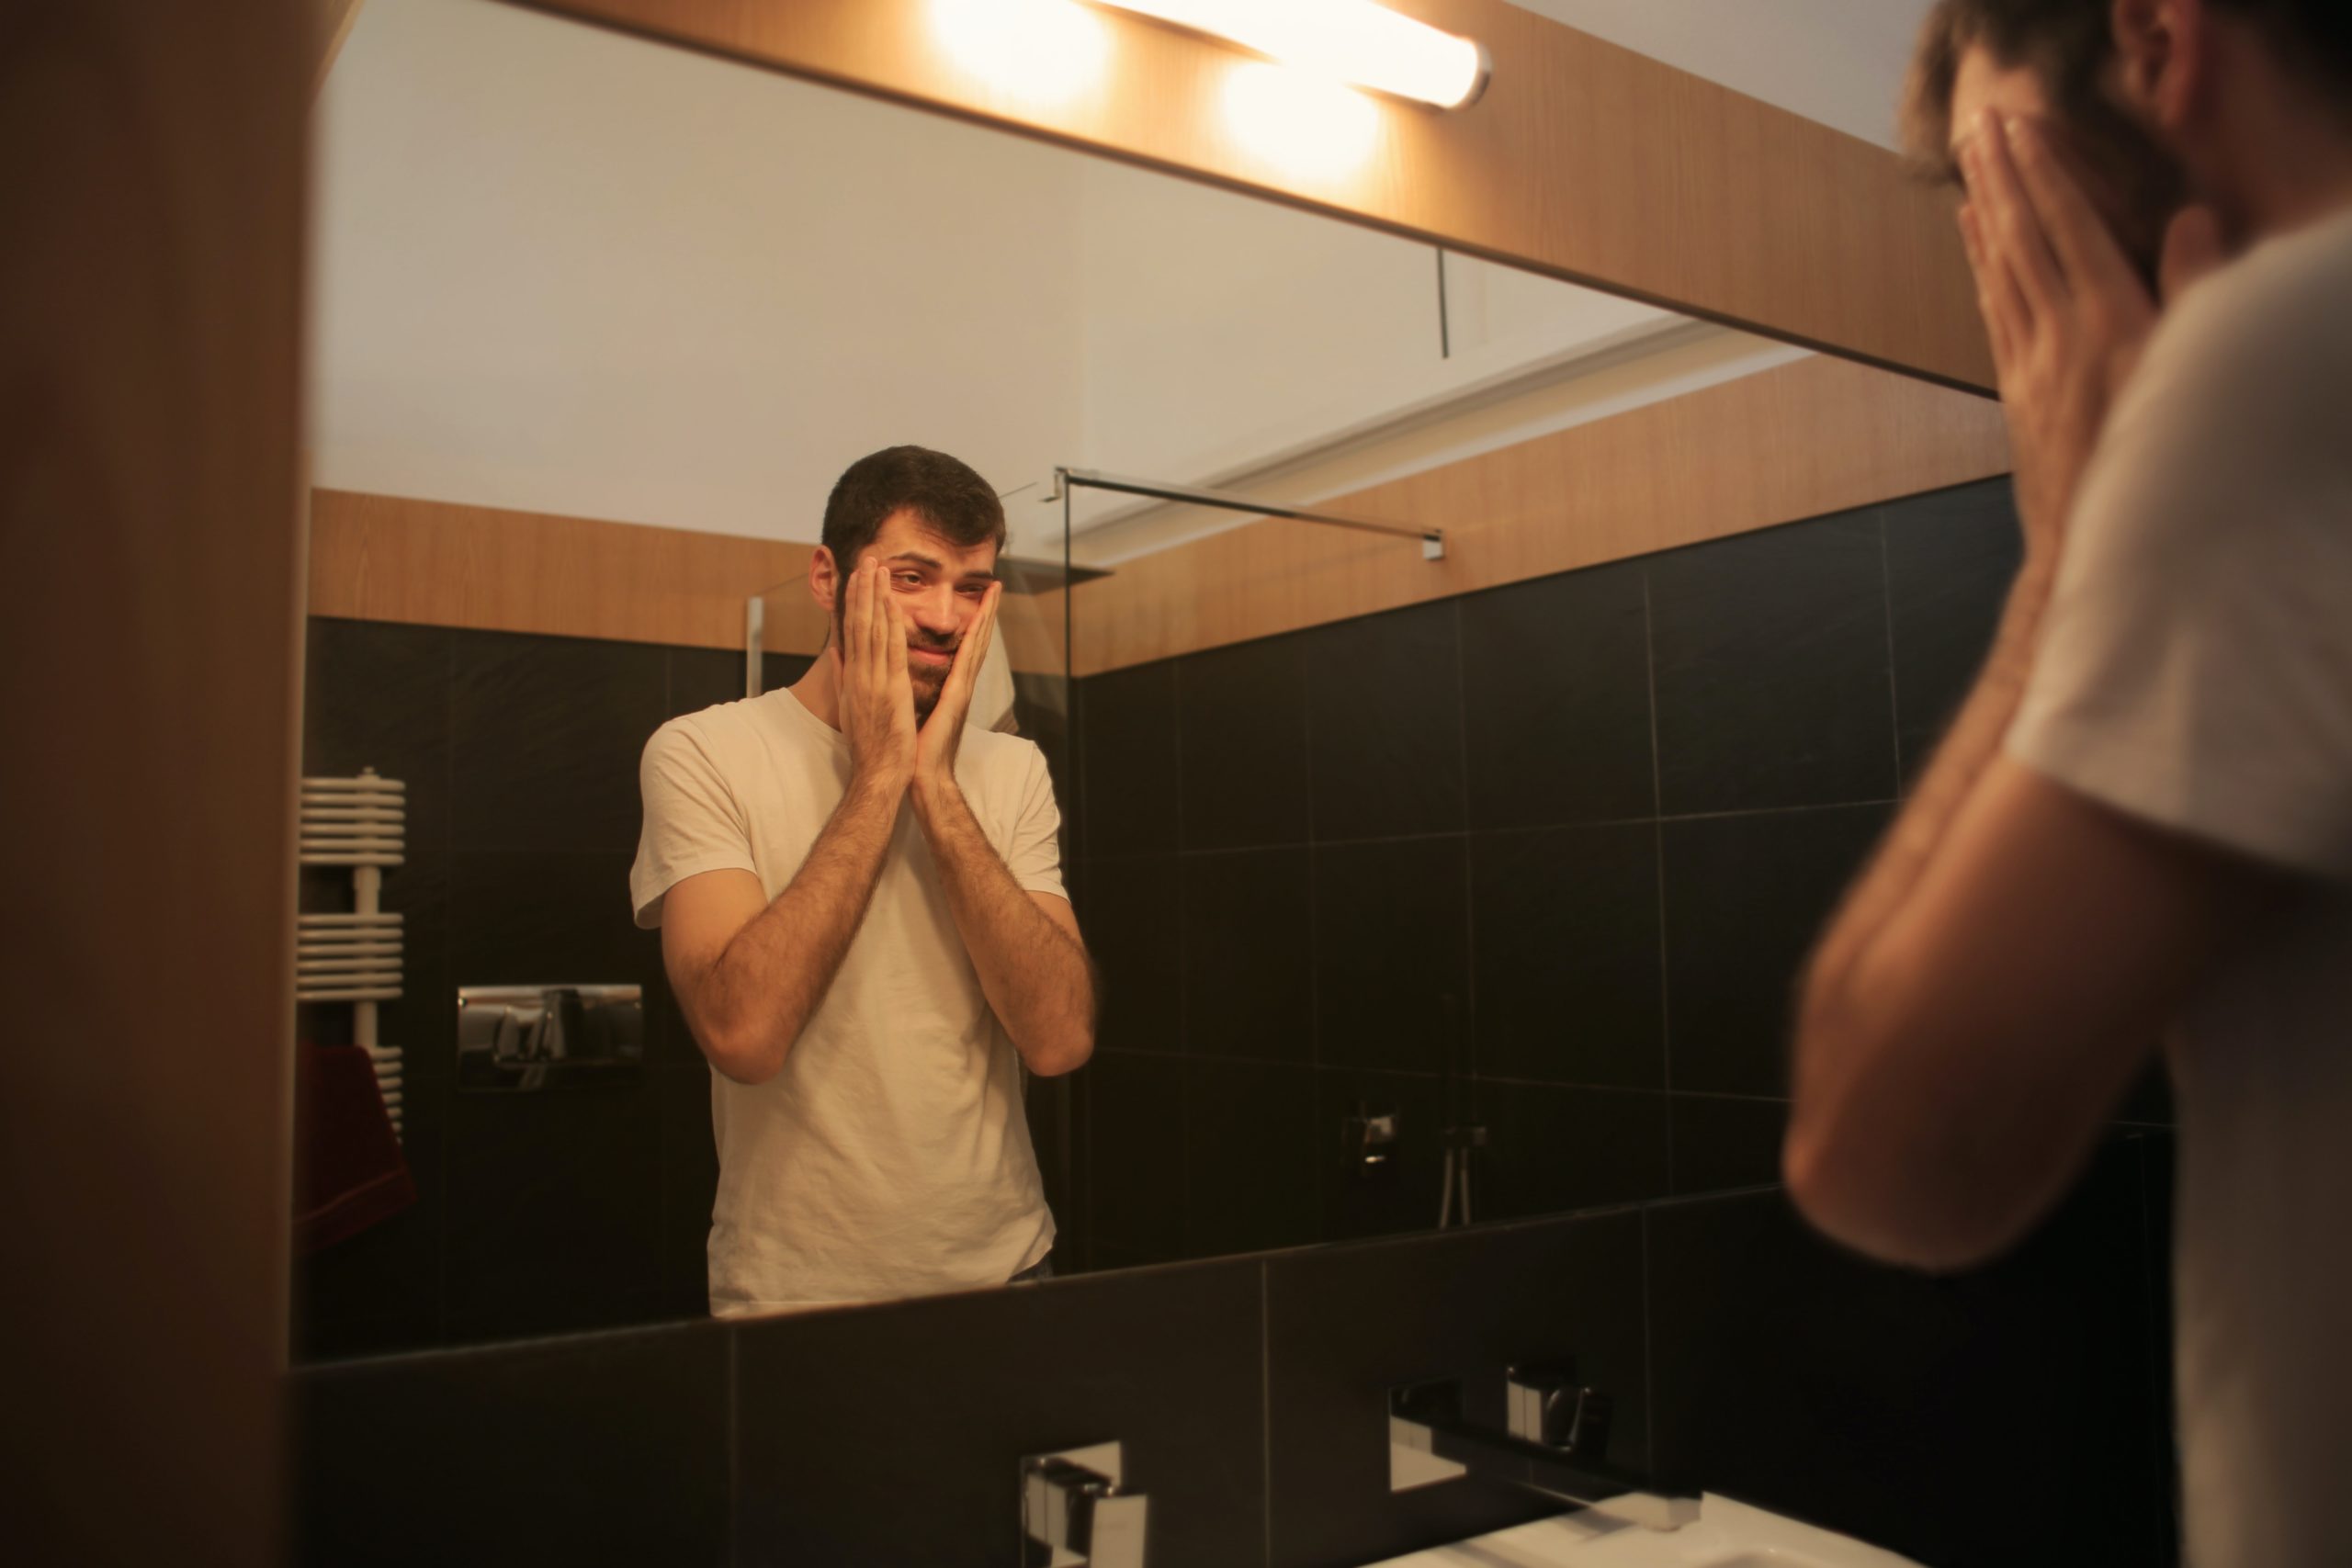 Man struggling with his mental health looking at himself in a mirror in the bathroom